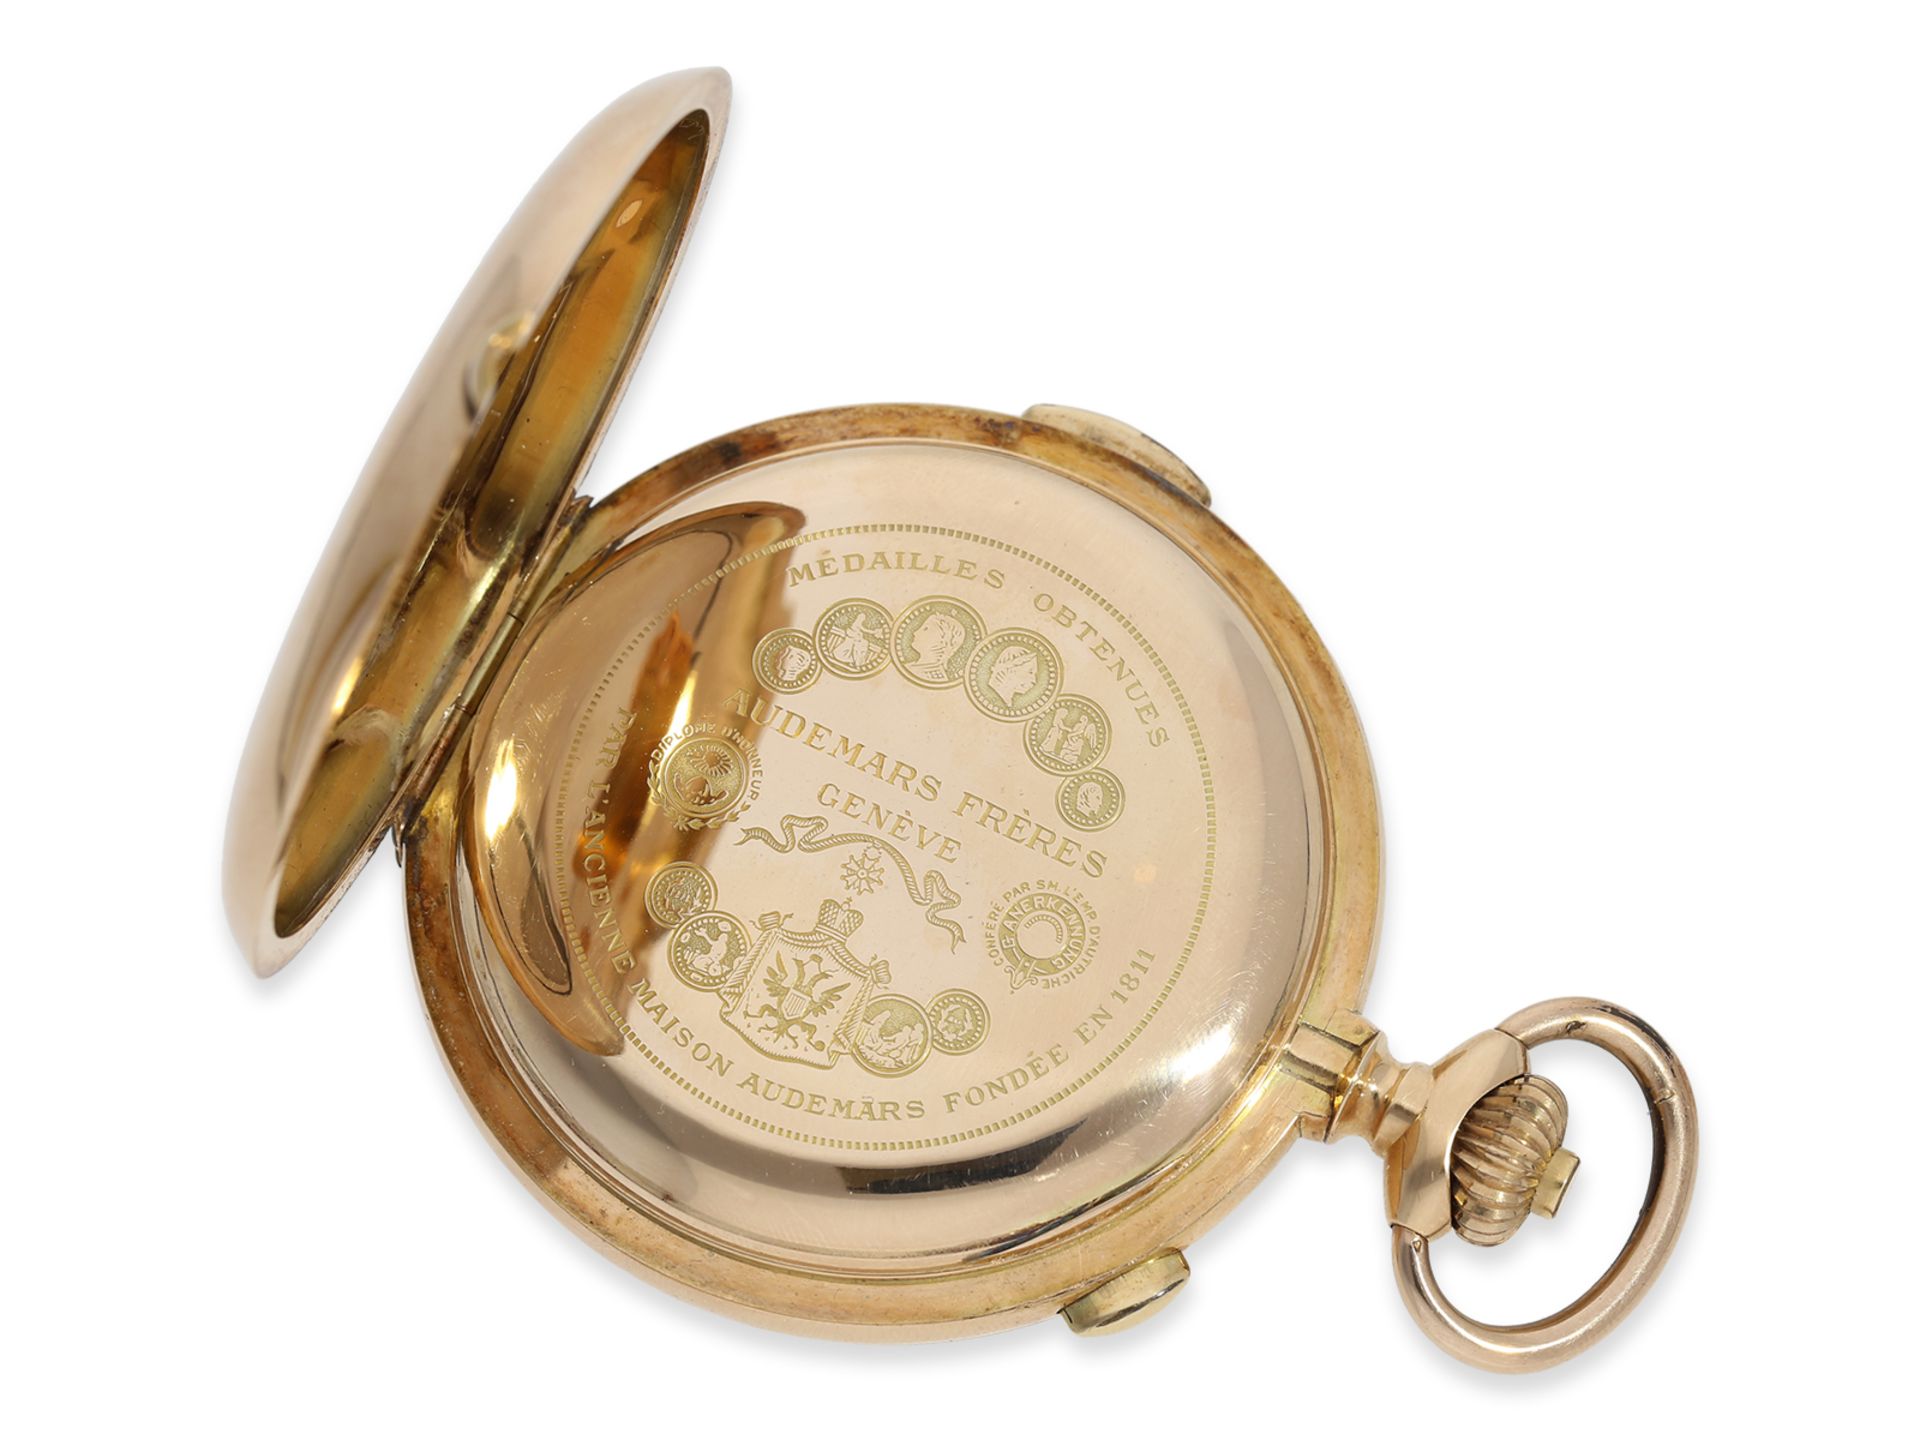 Pocket watch: impressive gold hunting case watch with repeater and chronograph, Audemars Freres Gene - Image 2 of 8